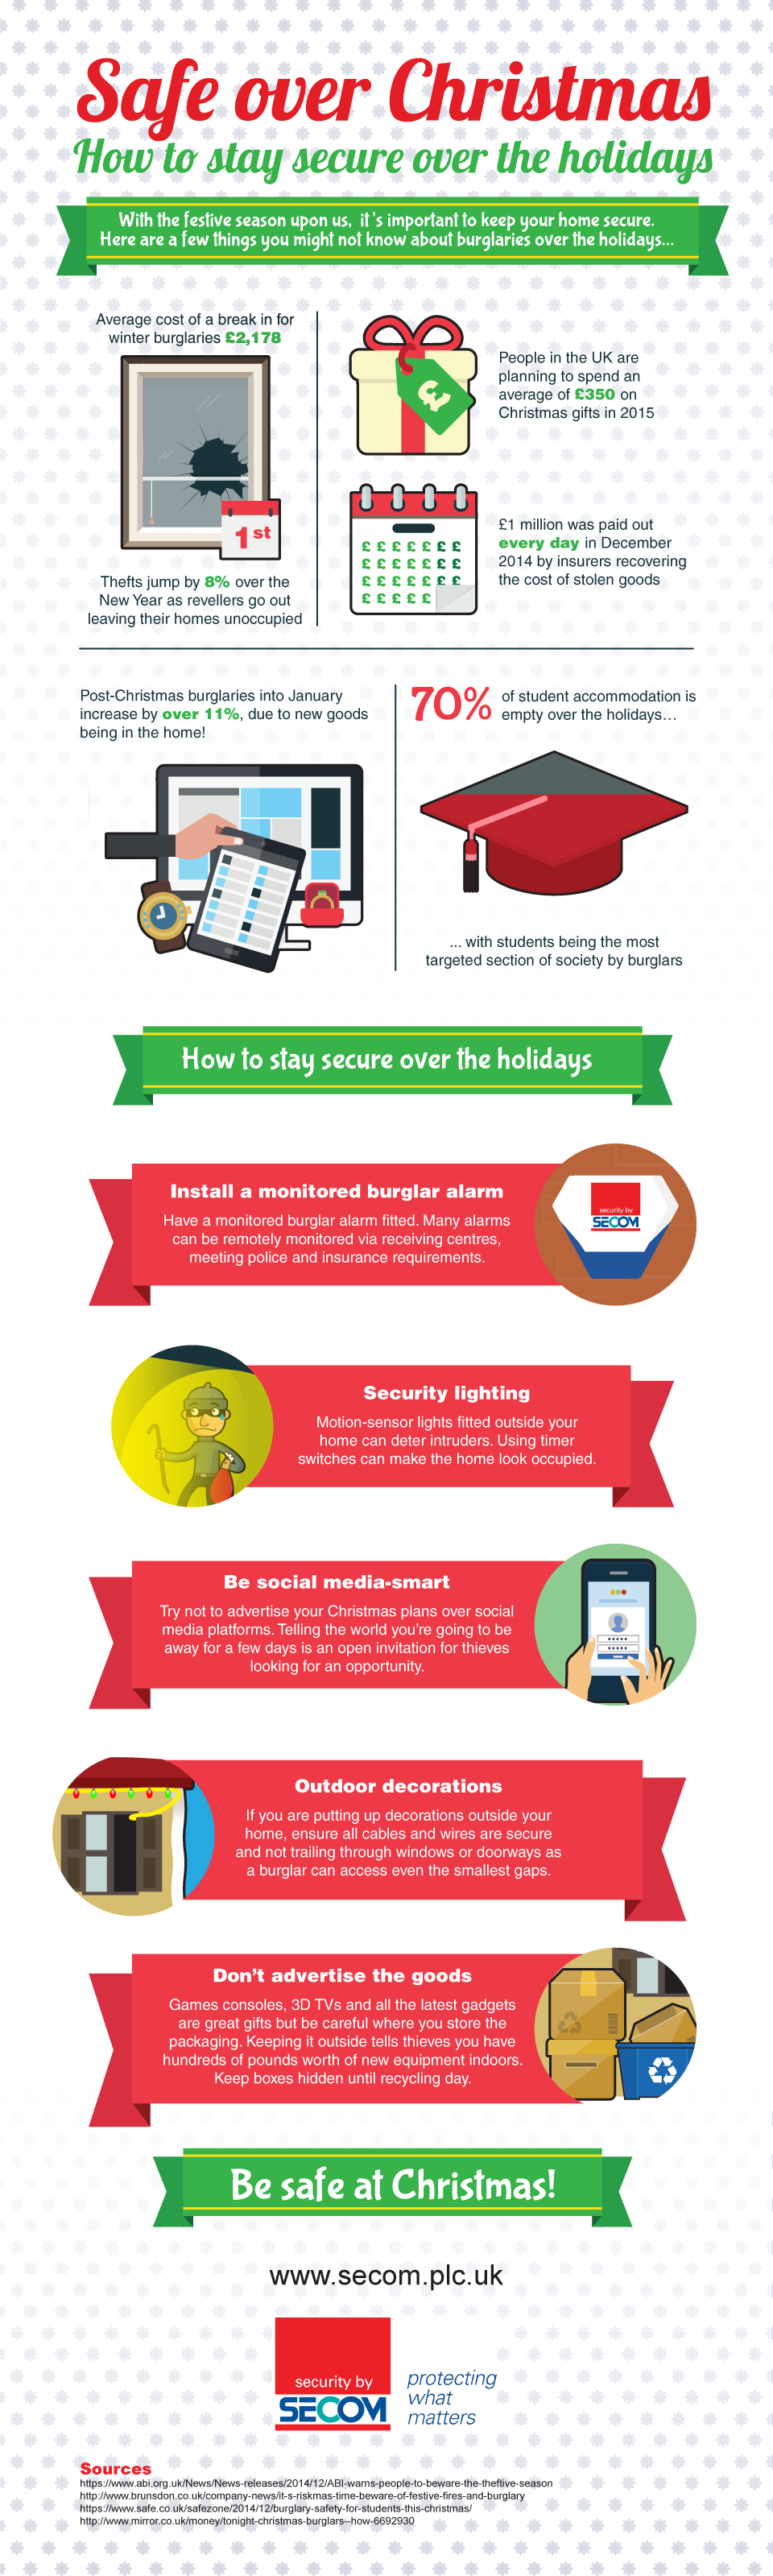 Christmas Burglaries - How To Stay Secure Over The Holidays